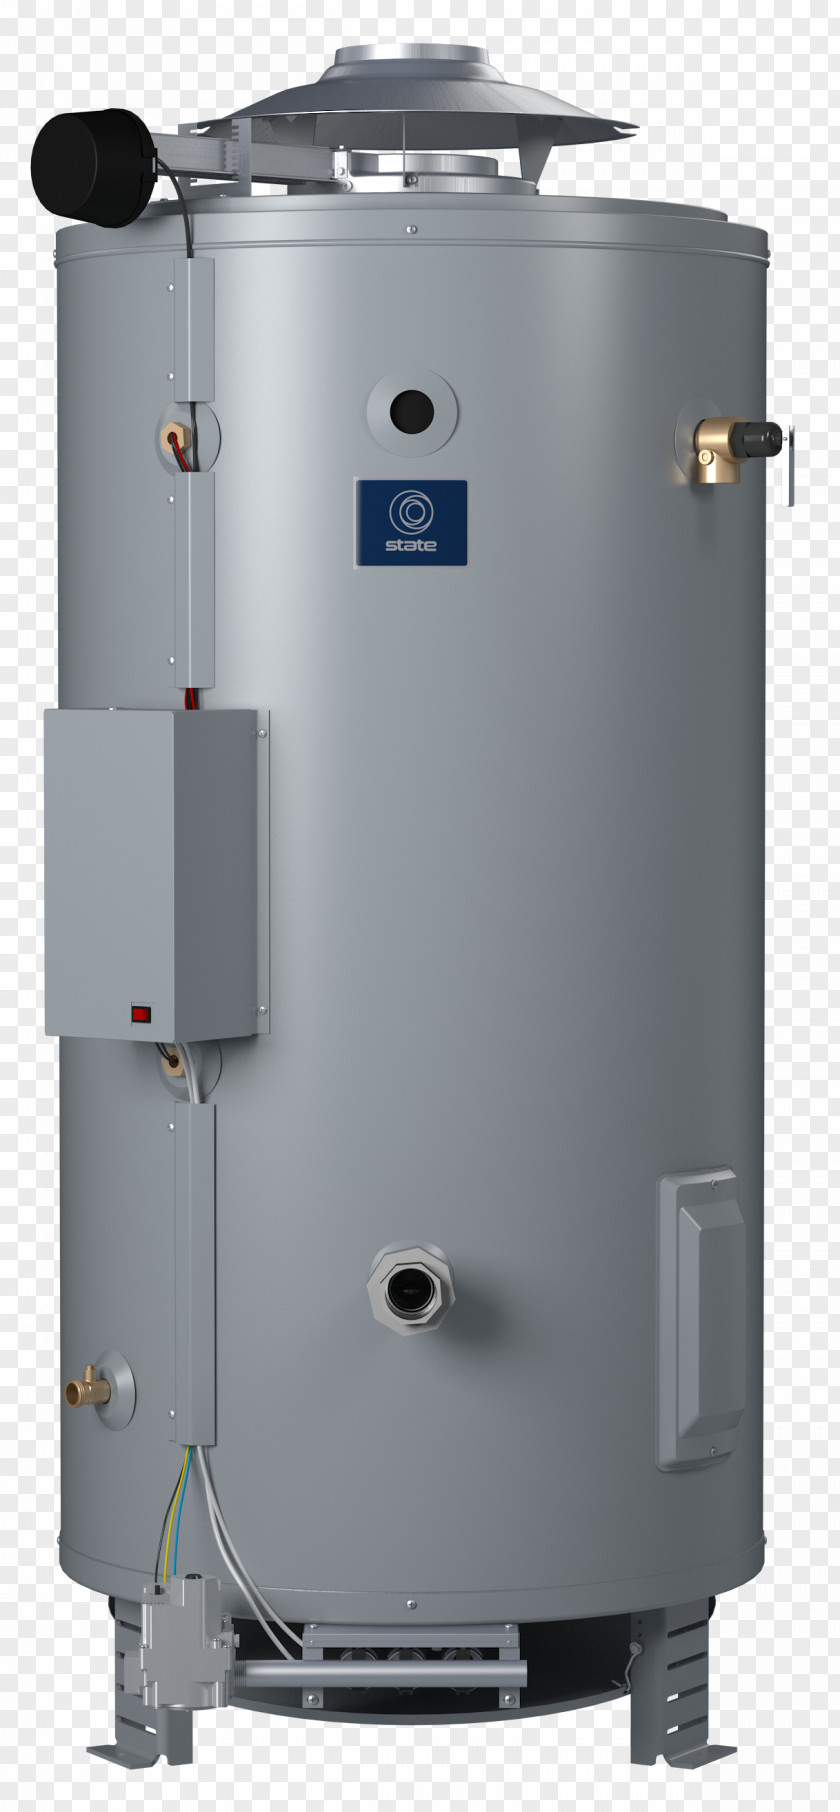 Damper Water Heating A. O. Smith Products Company Natural Gas Heater Bradford White PNG